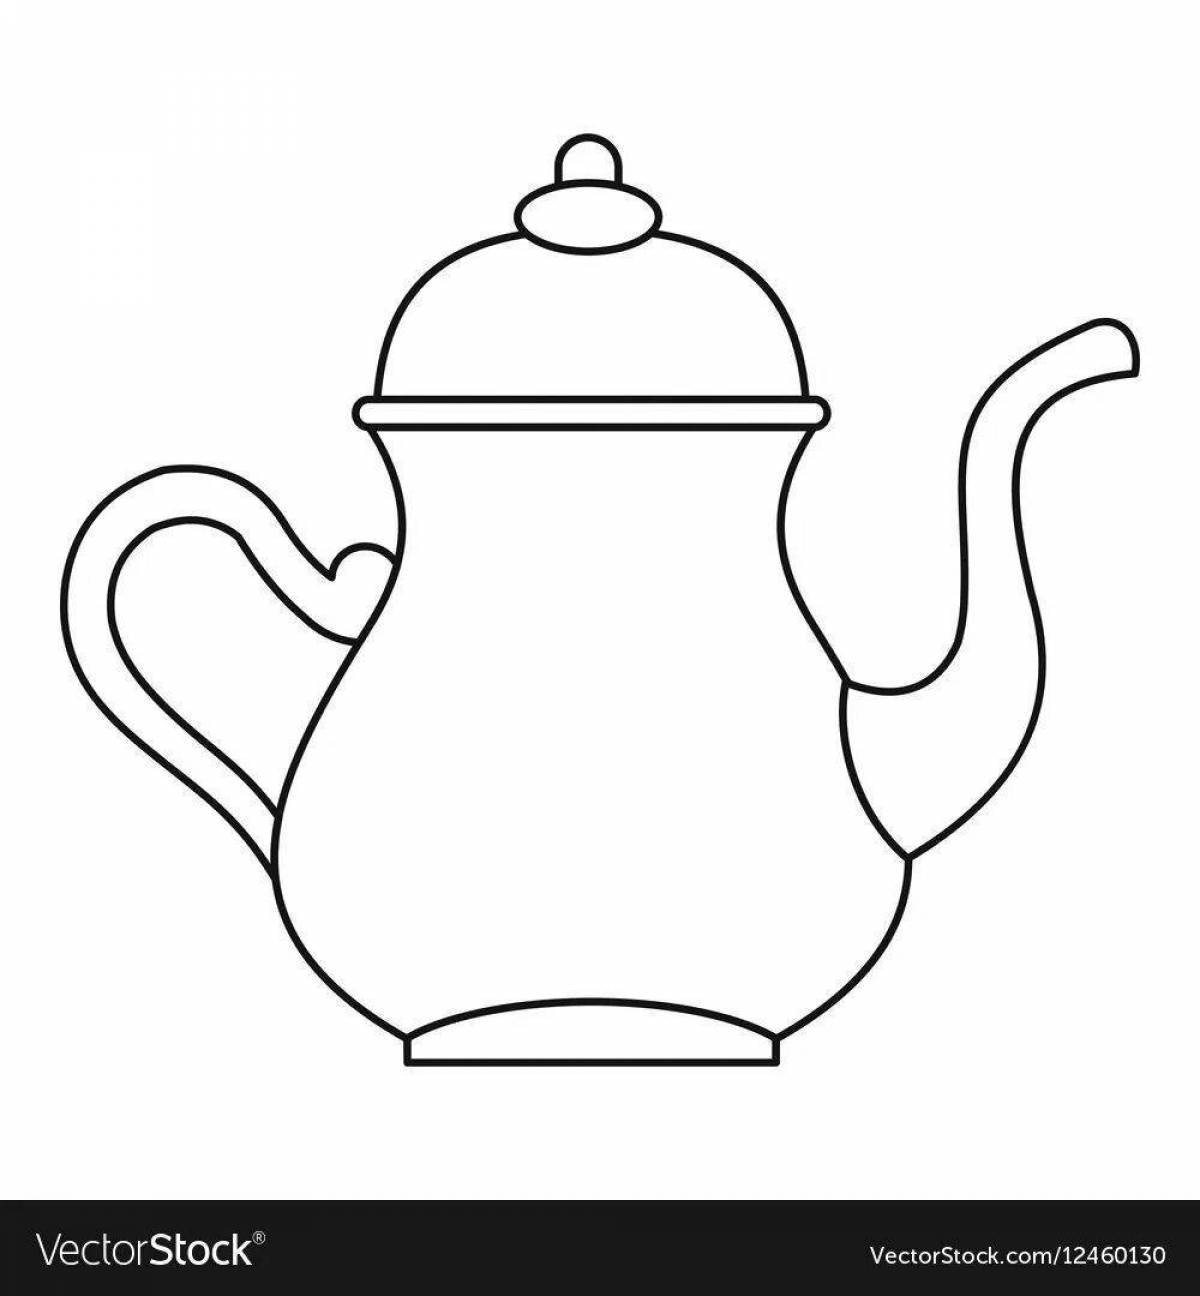 Gzhel teapot coloring page for kids